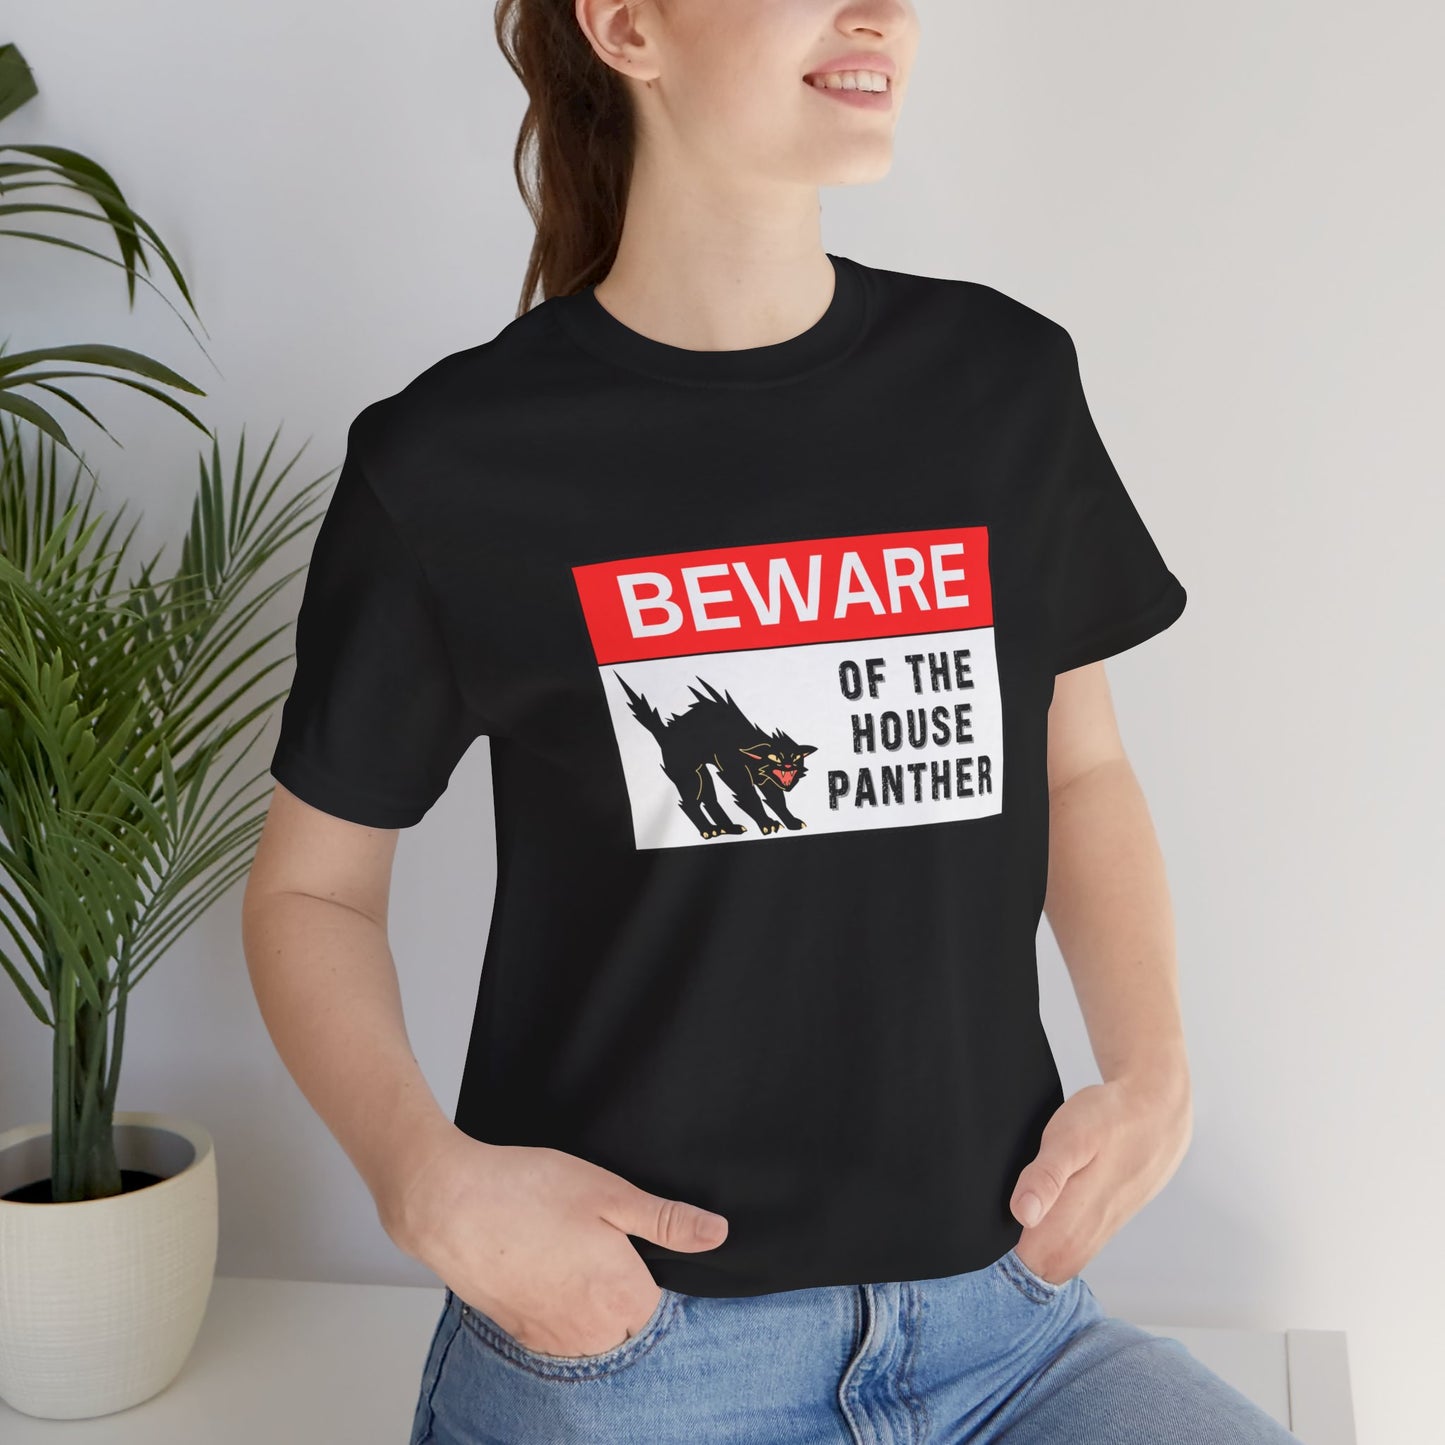 Beware Of The House Panther Classic Tee